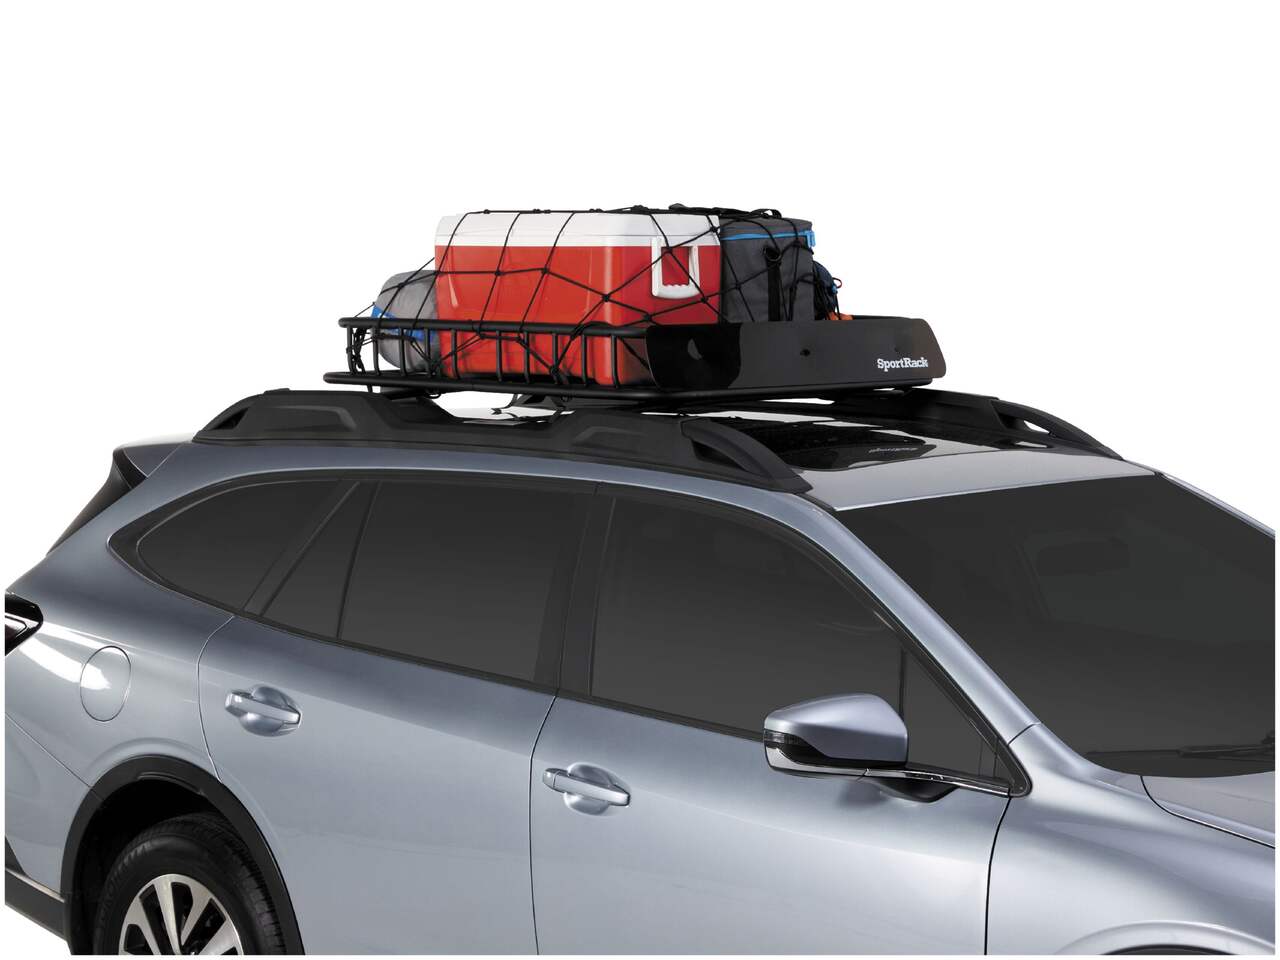 https://media-www.canadiantire.ca/product/automotive/automotive-outdoor-adventure/auto-travel-storage/0401146/sport-rack-roof-basket-4e776be5-4105-4016-a6ac-481c98758a88-jpgrendition.jpg?imdensity=1&imwidth=1244&impolicy=mZoom